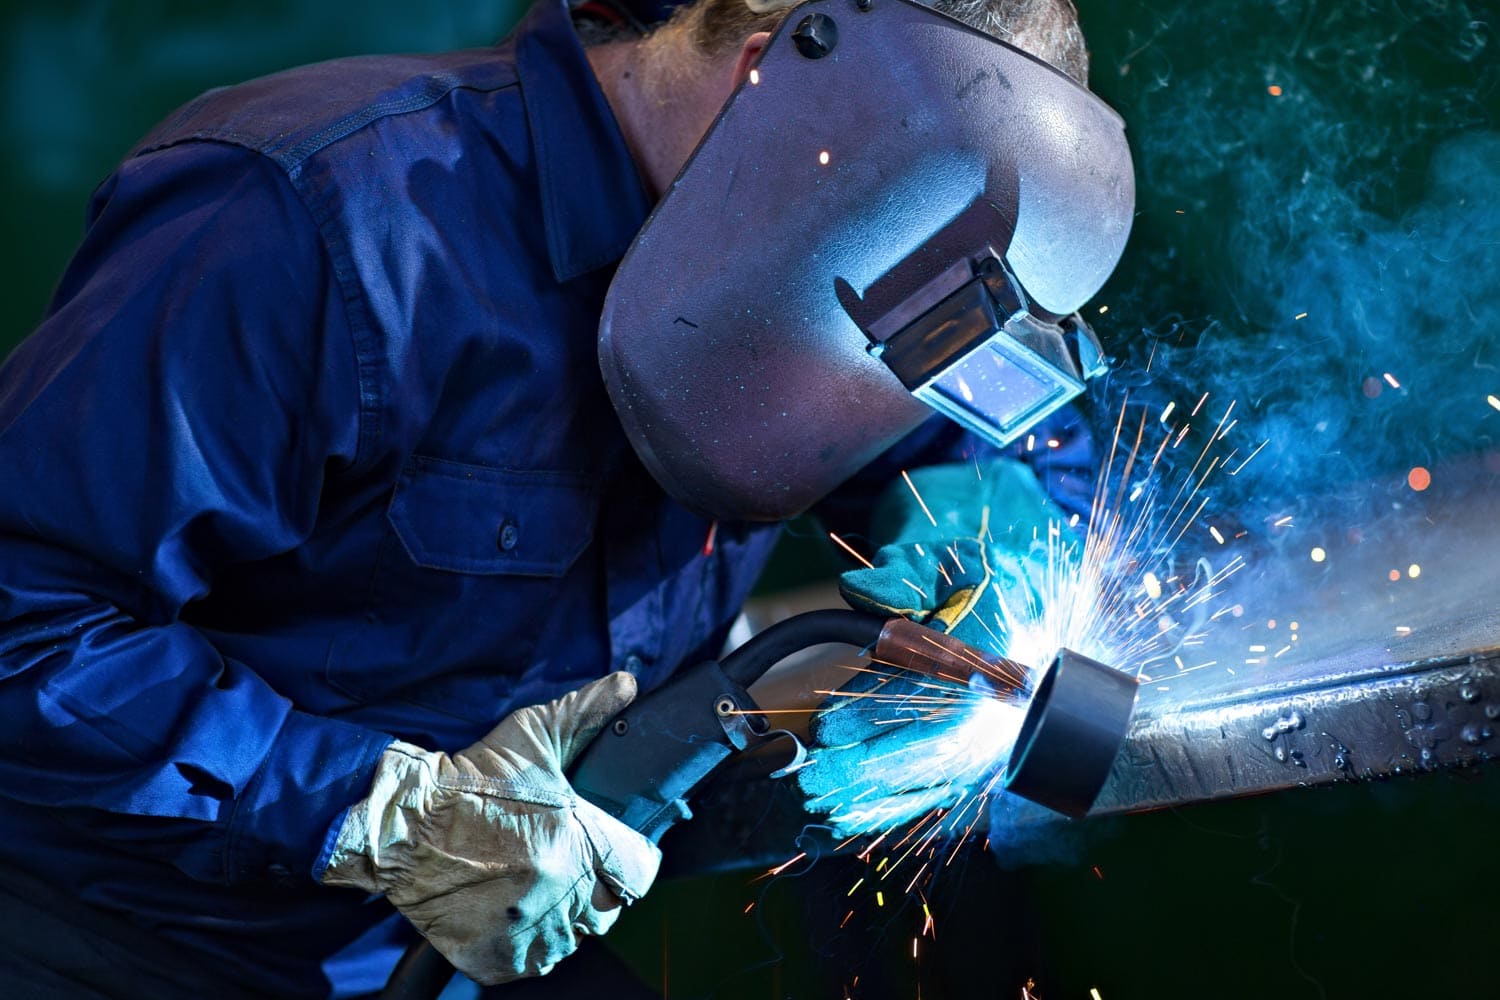 man welding and sparks flying